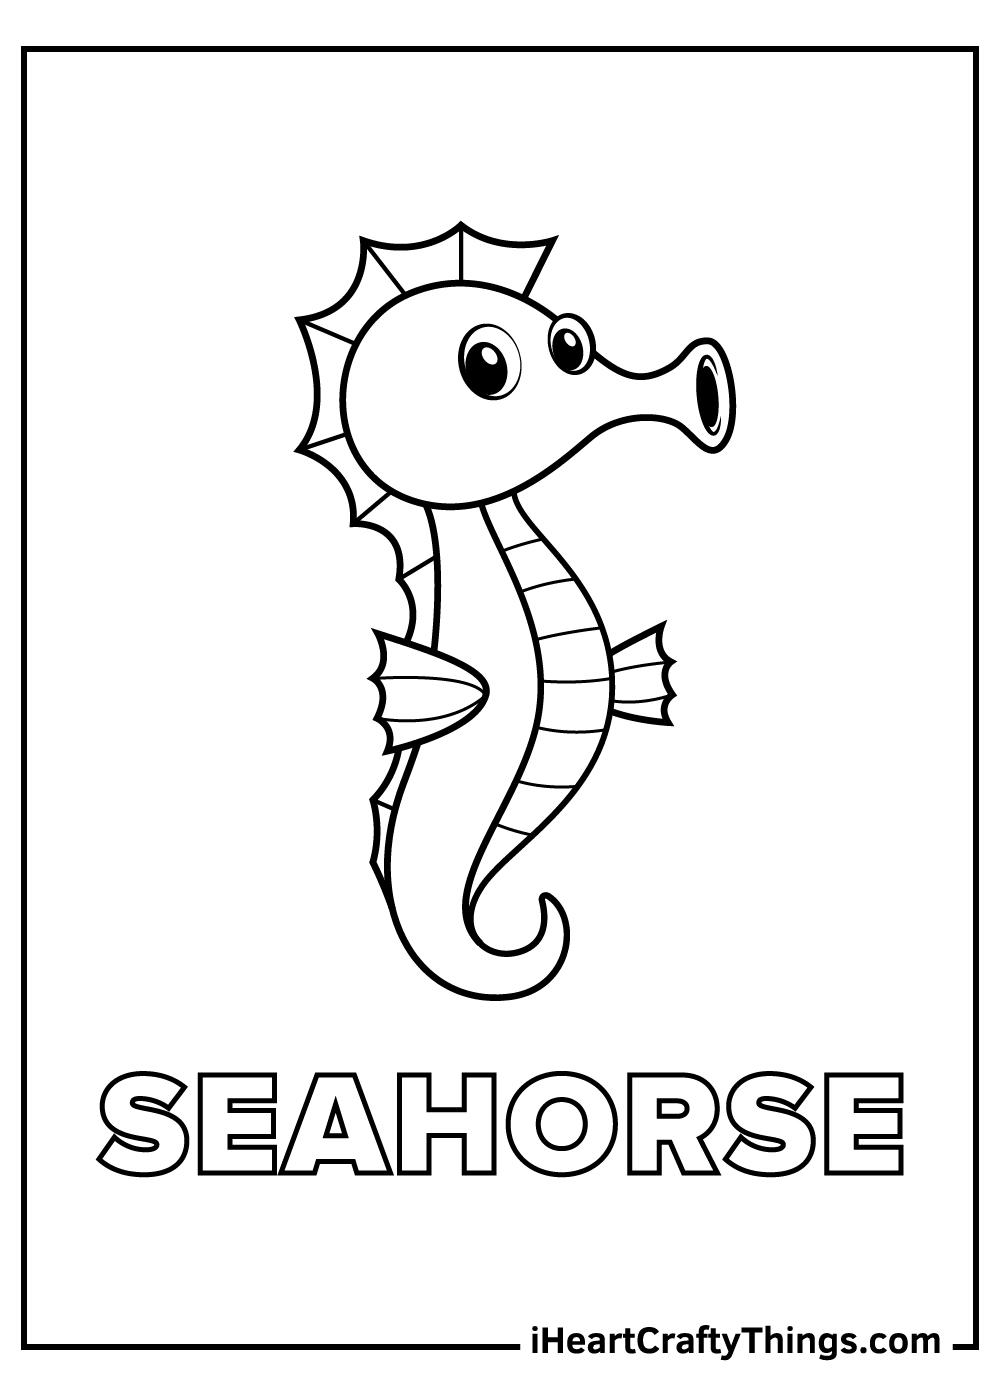 seahorse coloring pages for adults